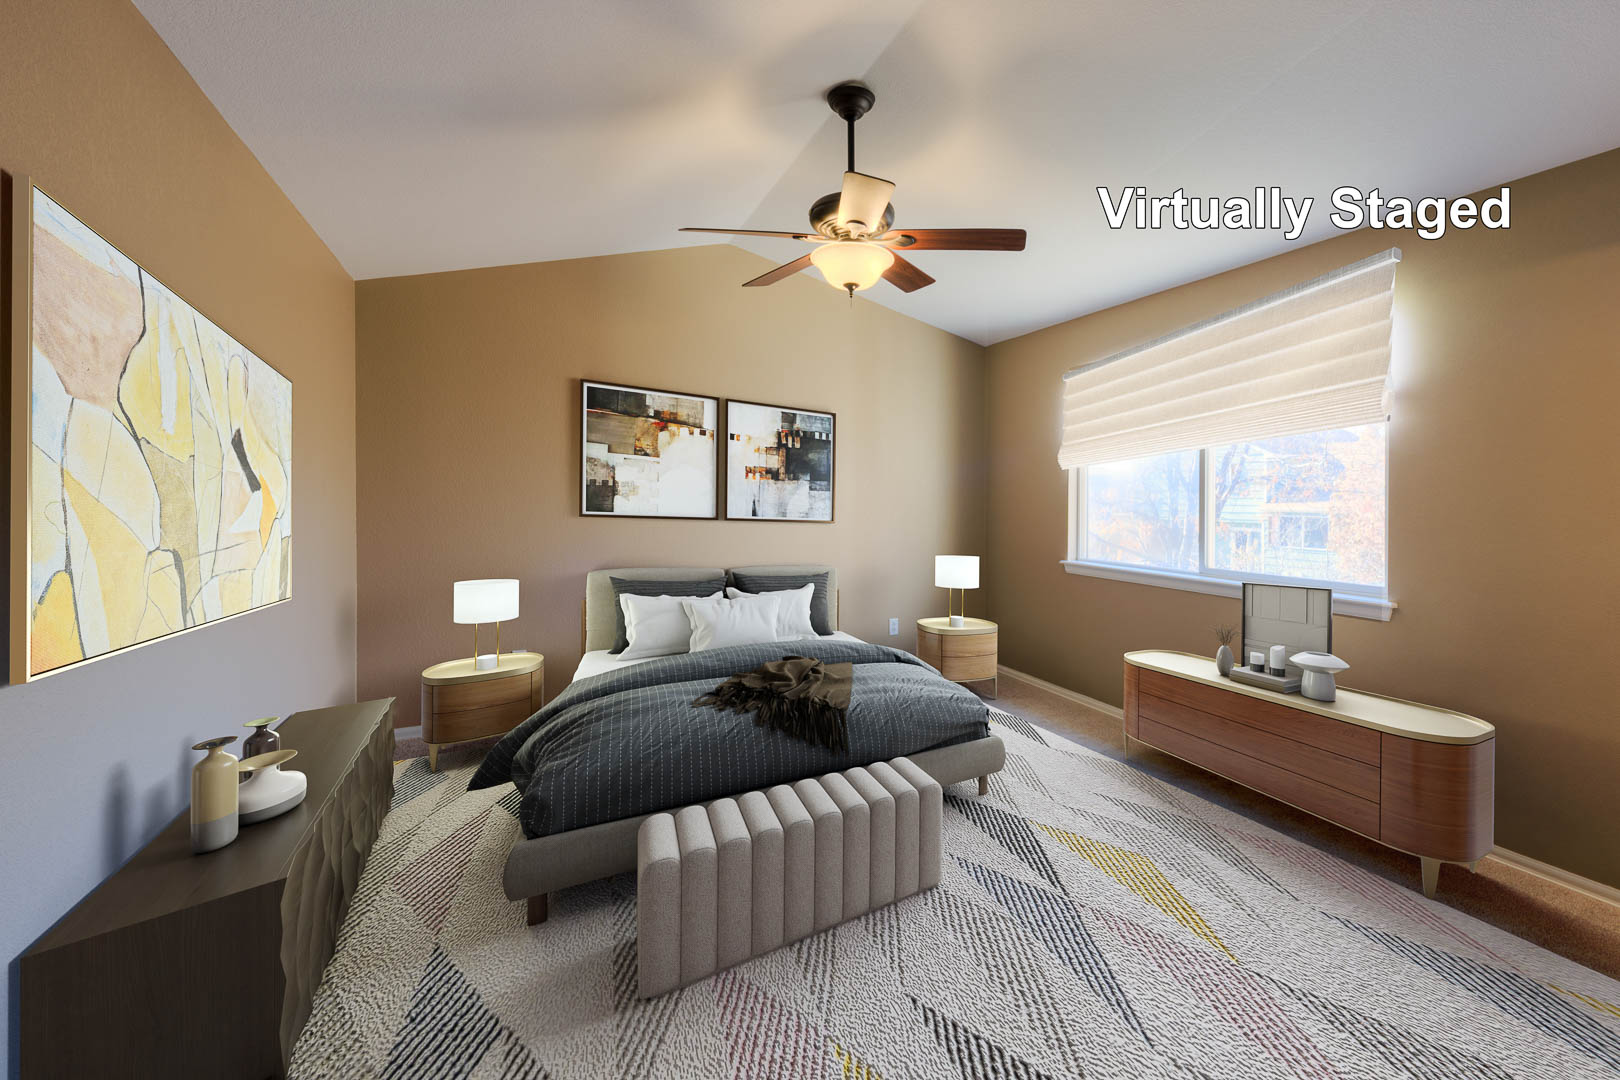 02a 2109 21a  Primary Bedroom1 5TMDE RVT3 AD 23 12 23 15 23 Print Web - Virtual Staging